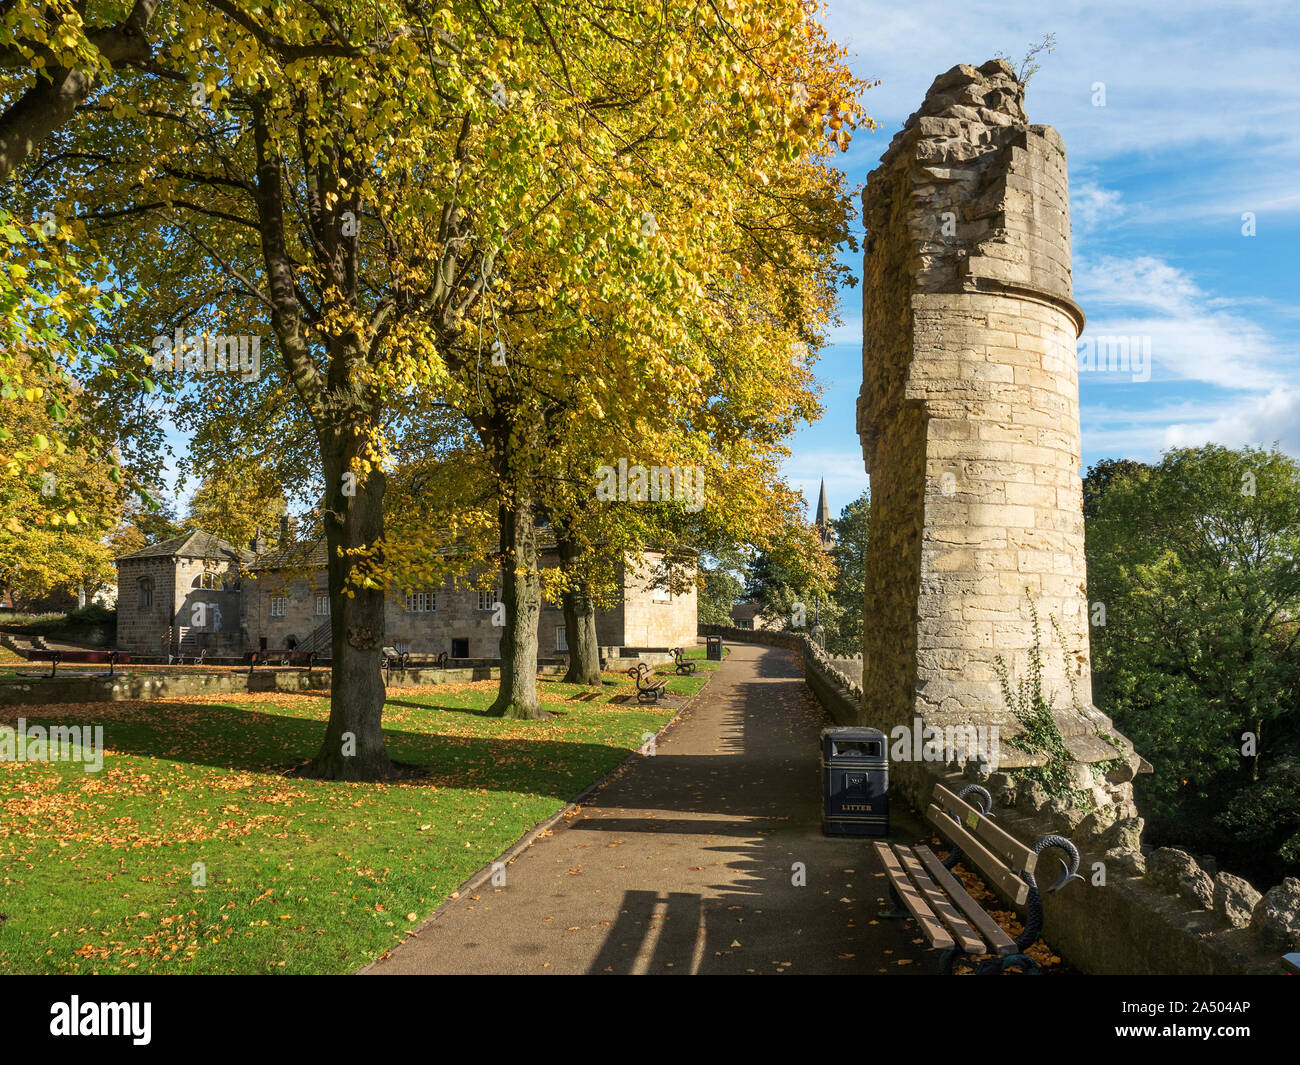 Ruined tower in the Castle Grounds at Knaresborough North Yorkshire England Stock Photo